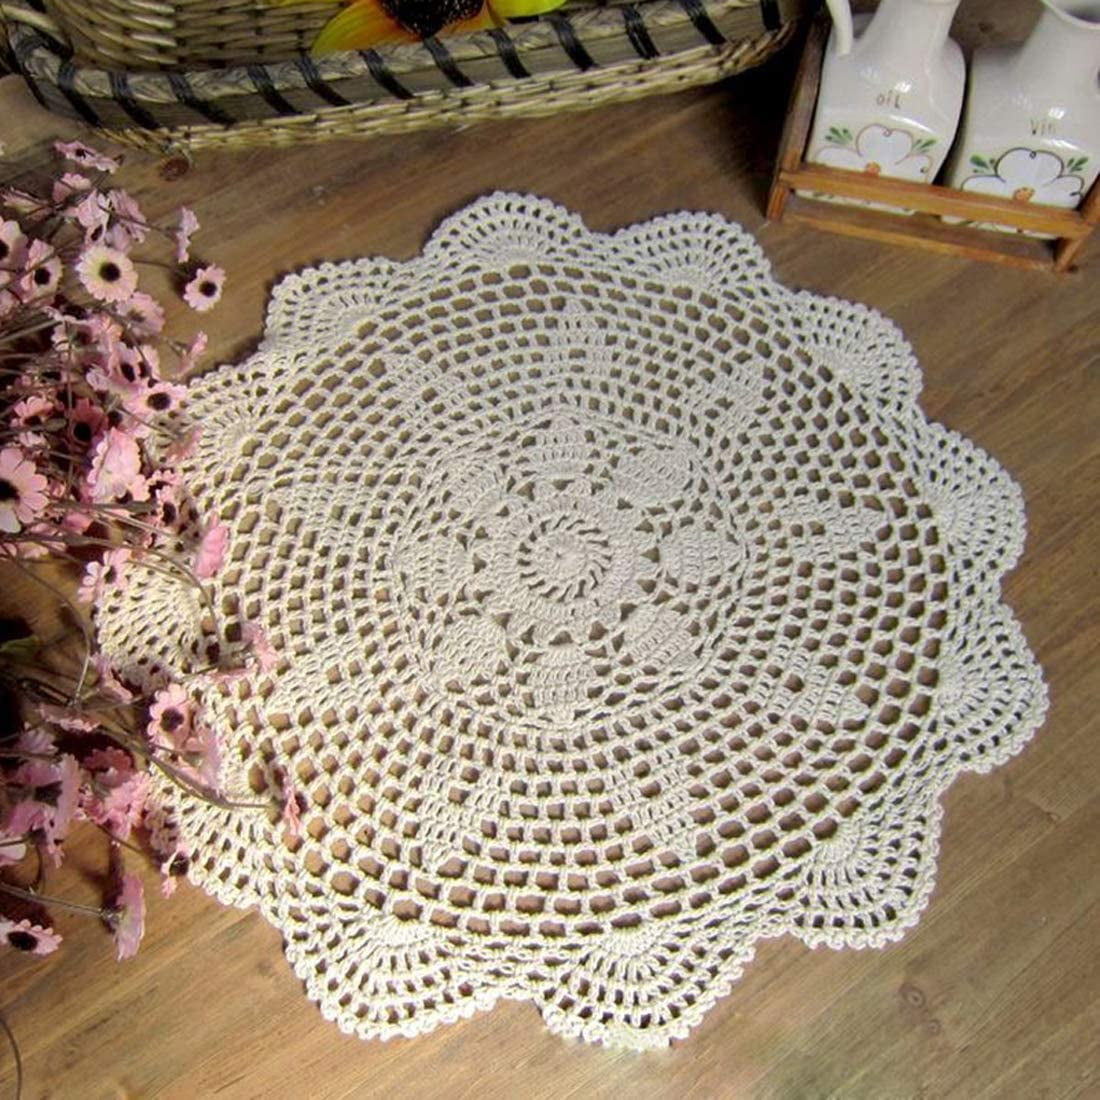 Details about   Round Handmade Crochet Lace Tablecloth Doily Cotton Cover Kitchen Beige 31 Inch 